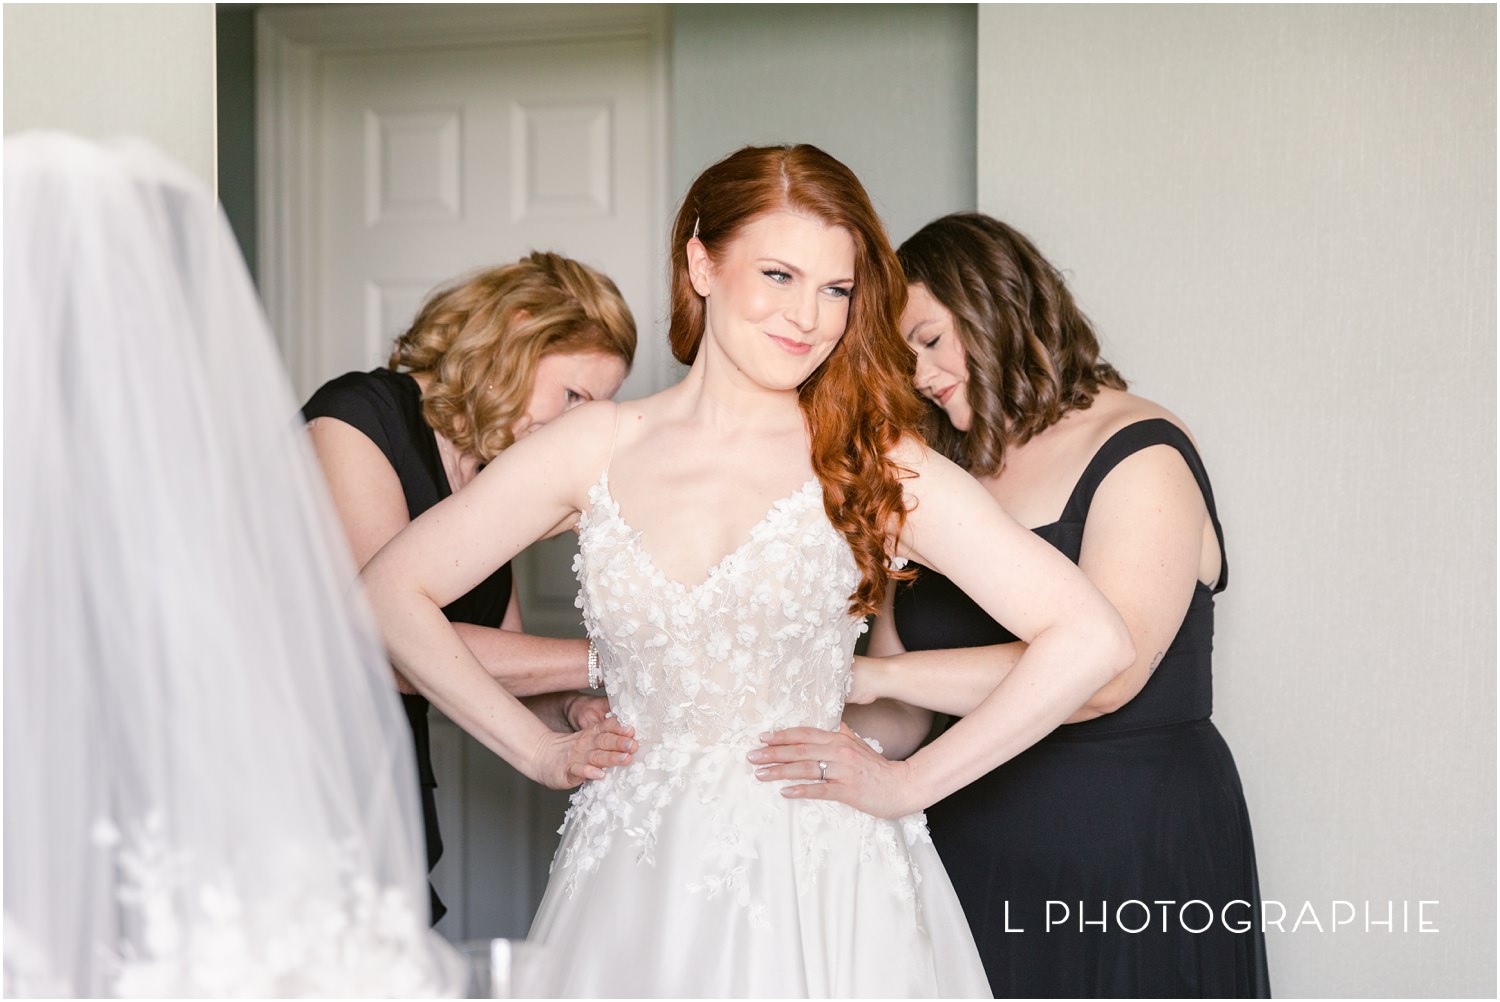 brazilian groom,bride getting ready at the chase park plaza,bride with red hair,catering st. louis wedding,forest park reception venue,jane,marcio,trolley room ceremony set up at the visitor's center in forest park,trolley room wedding reception,